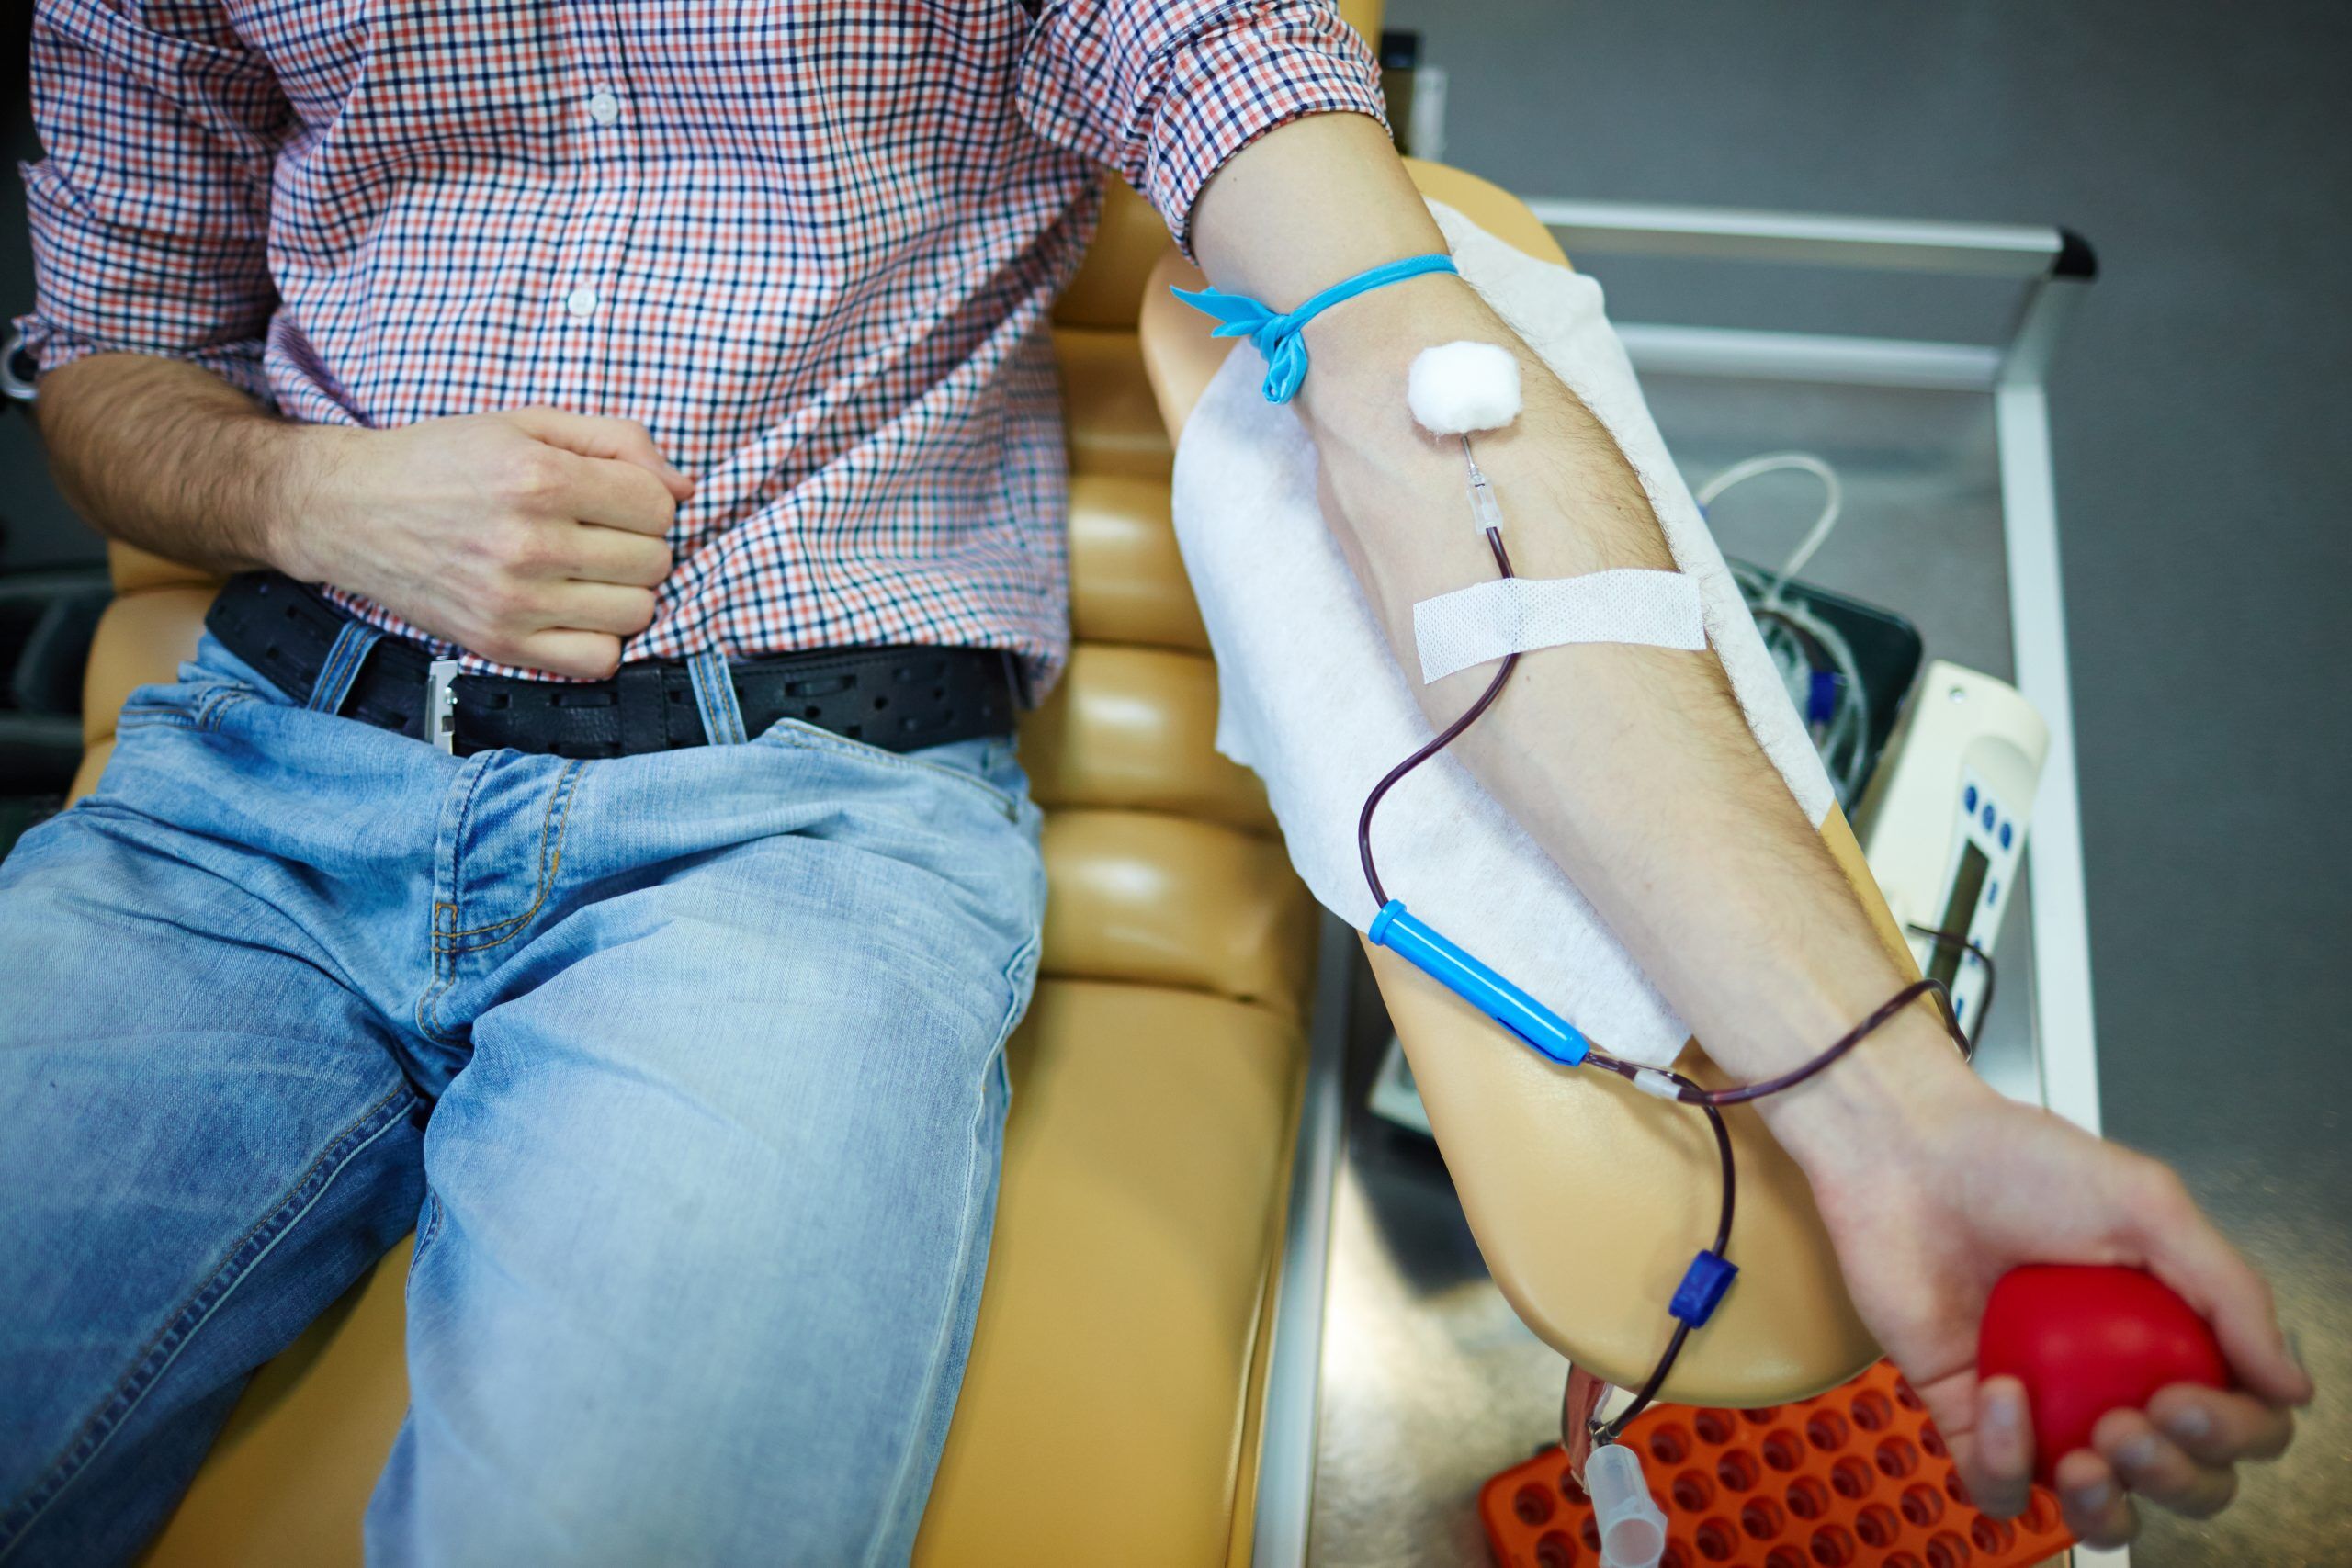 can gay men donate blood in the uk